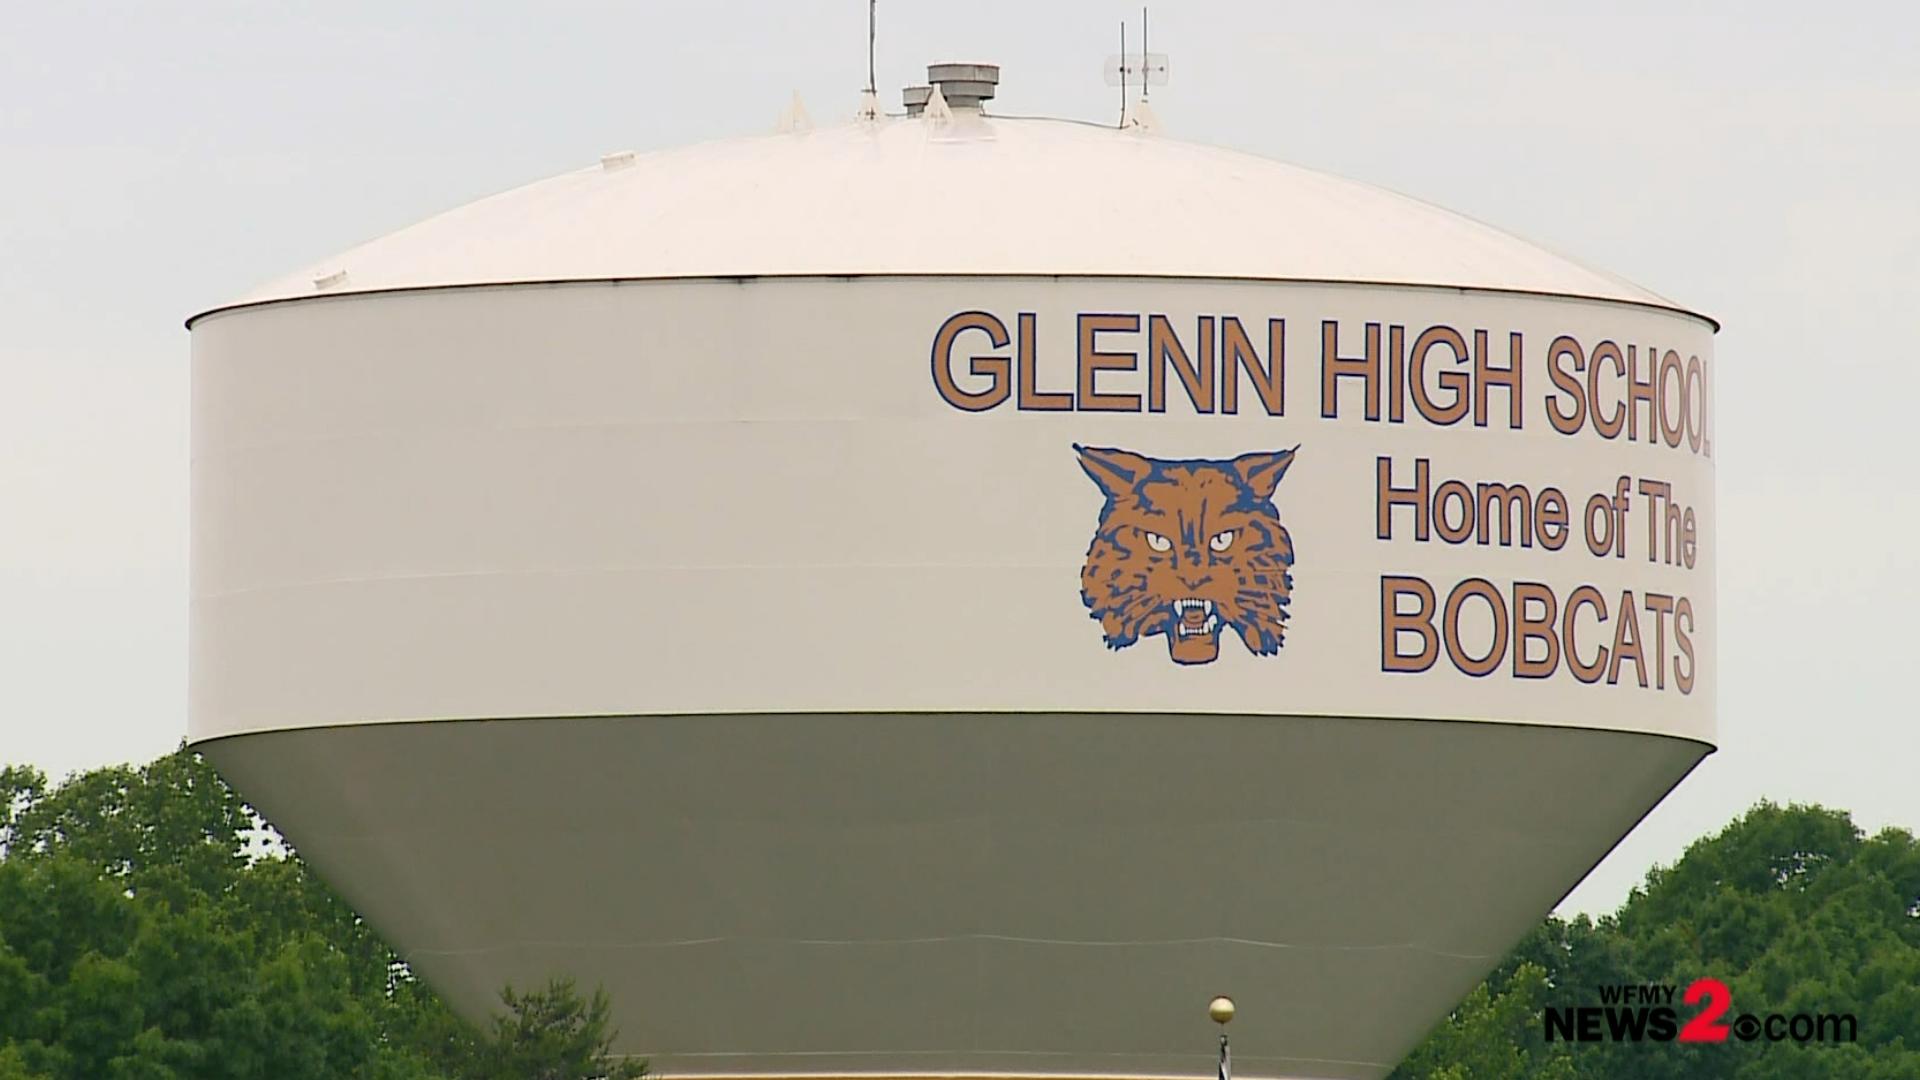 During a random search, Forsyth County deputies said a K9 helped find a gun, an airsoft firearm, a loaded magazine, and a box of ammo inside a car at Glenn High.